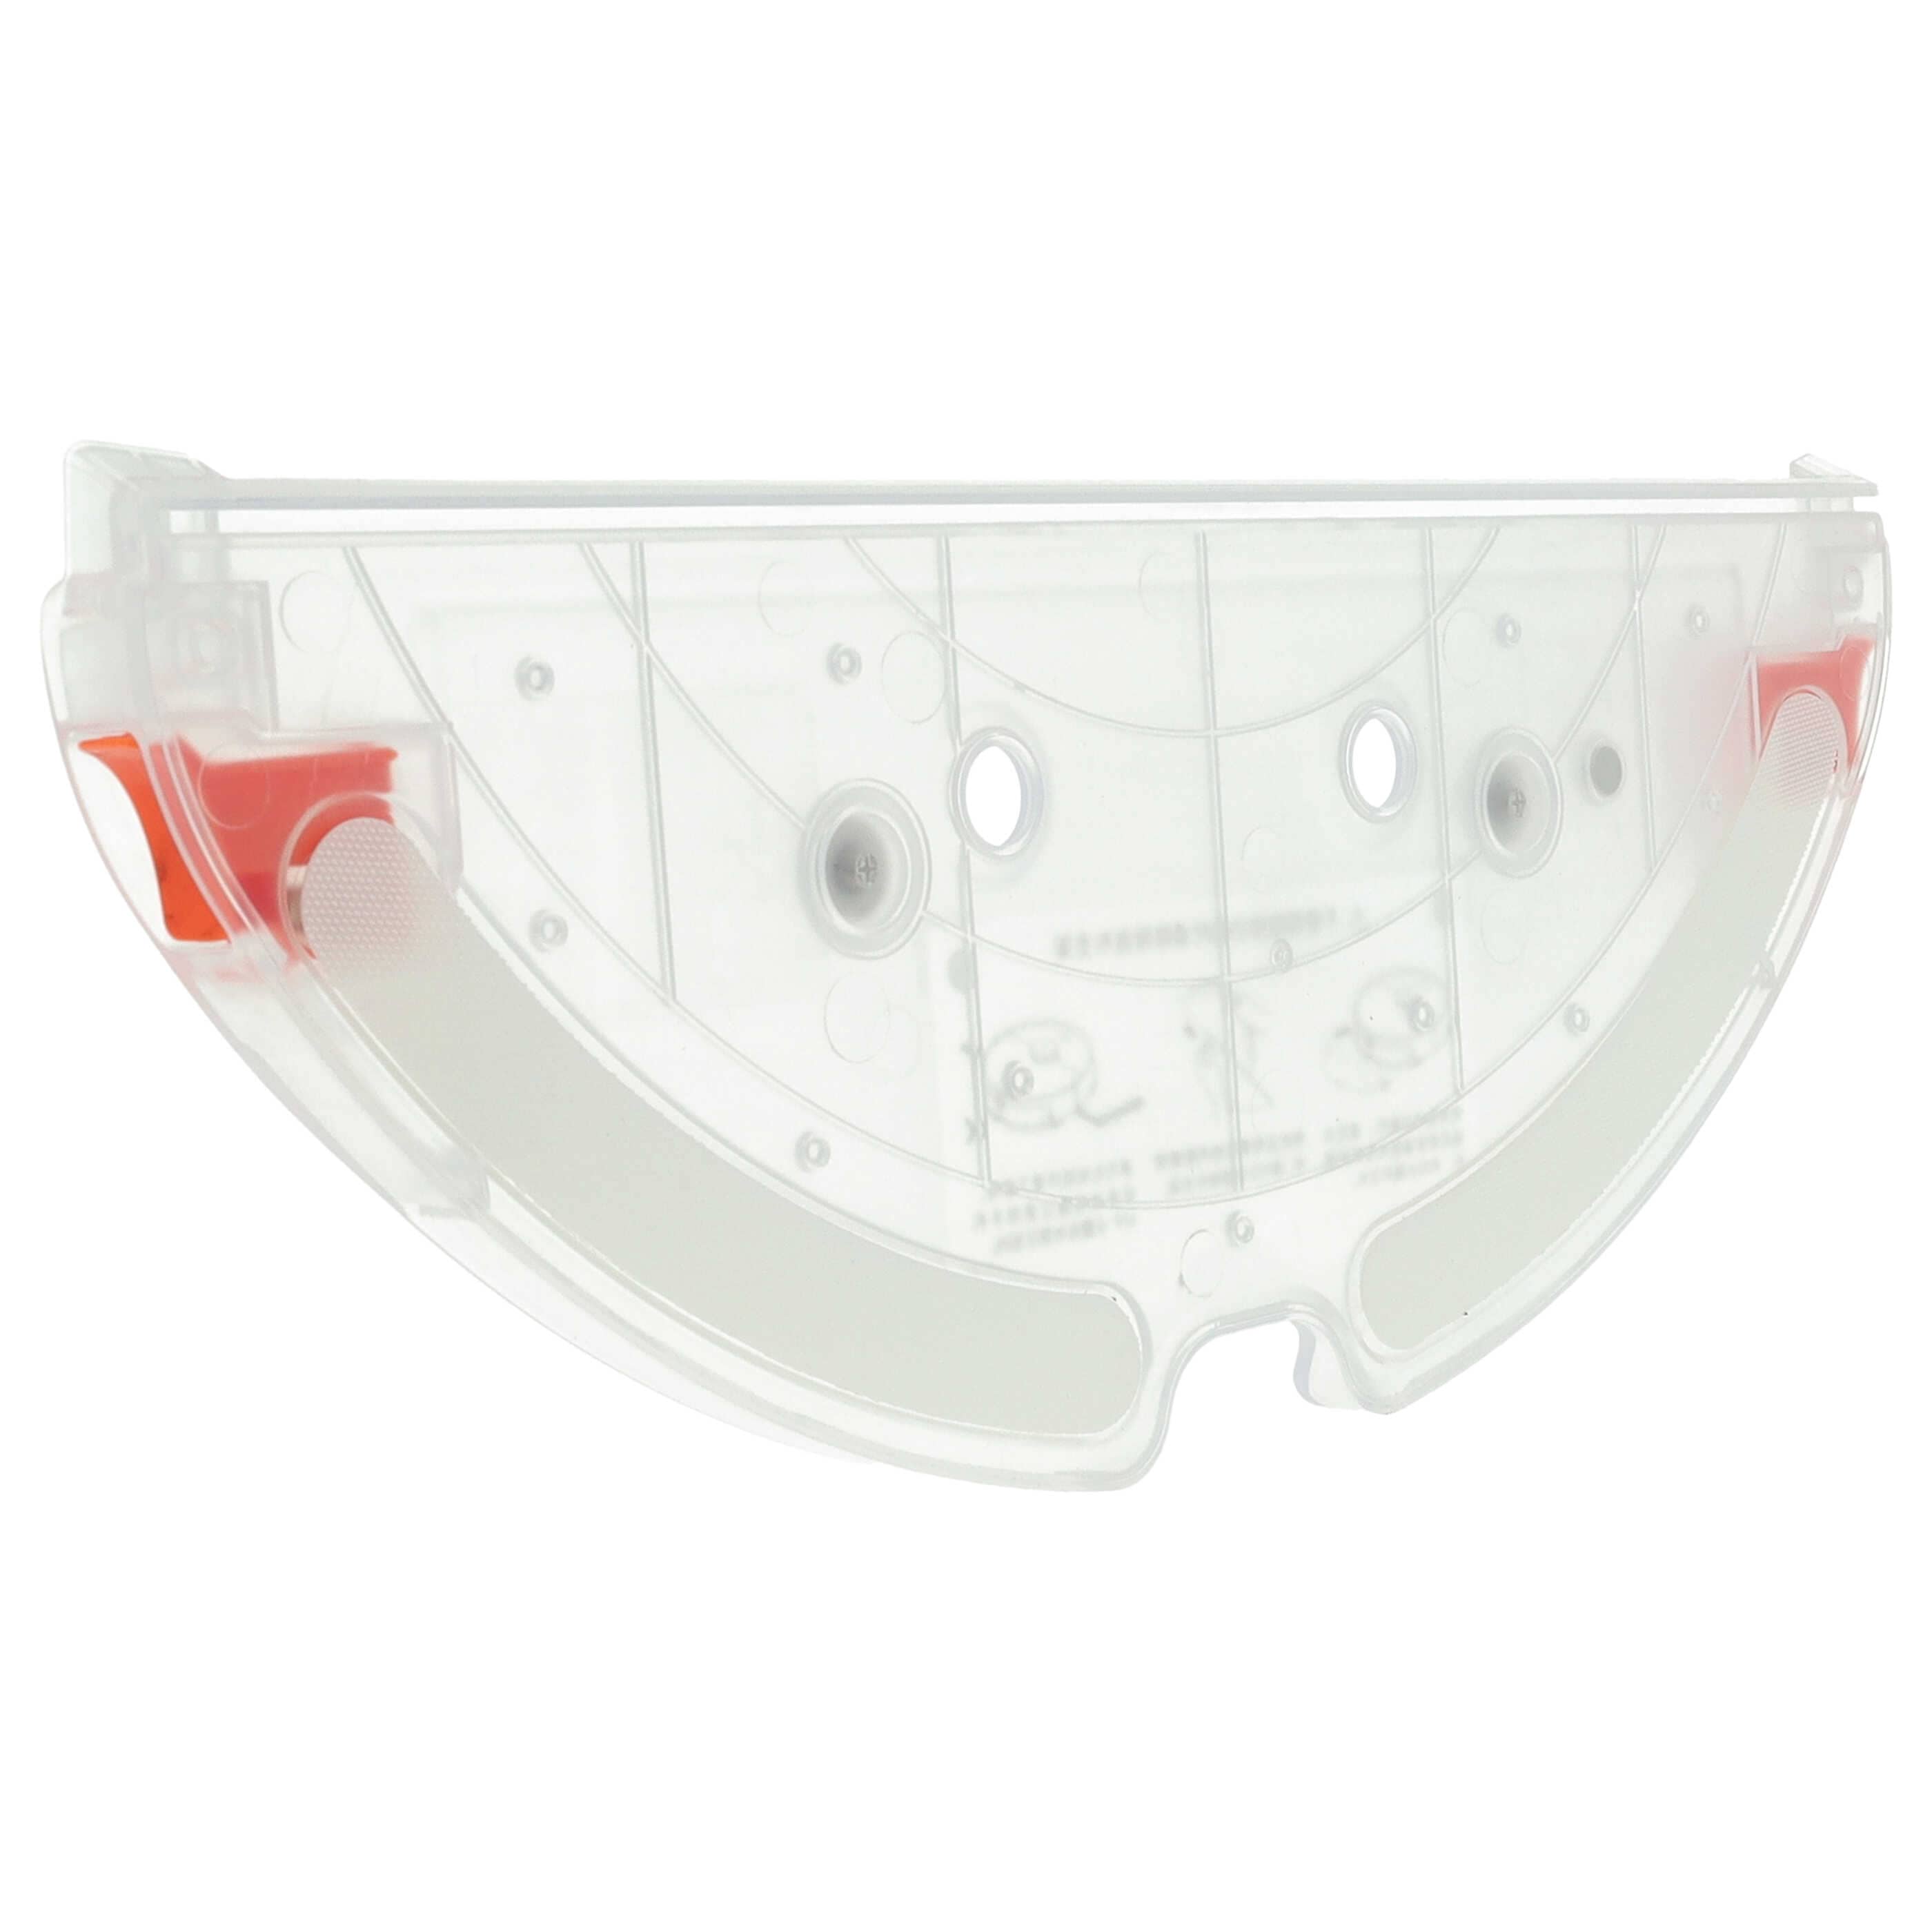 Mop Plate suitable for Roborock S5 Max Robot Vacuum Cleaner - ABS Plastic, transparent / red